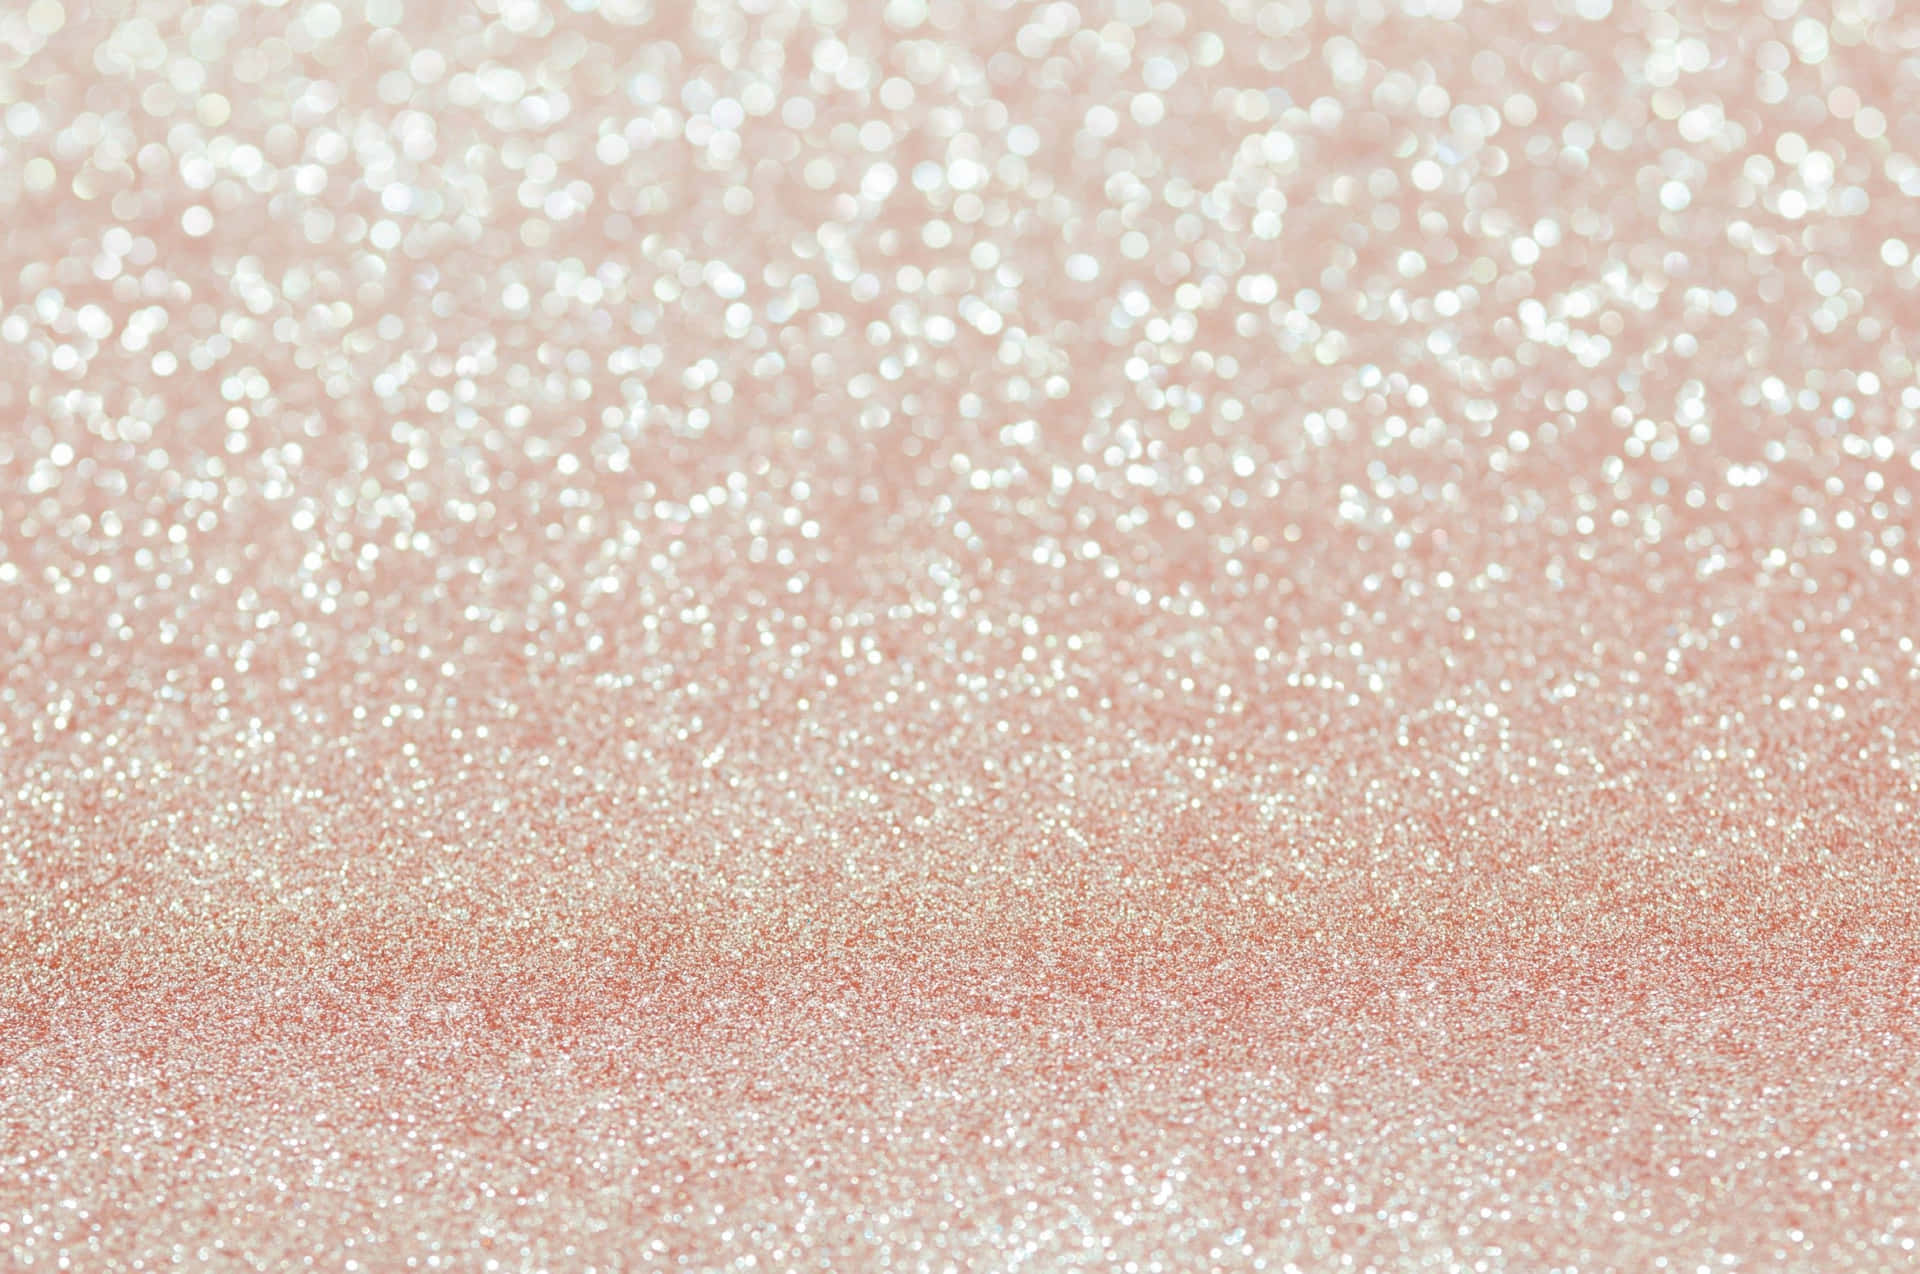 A Close Up Of A Pink Glittery Background